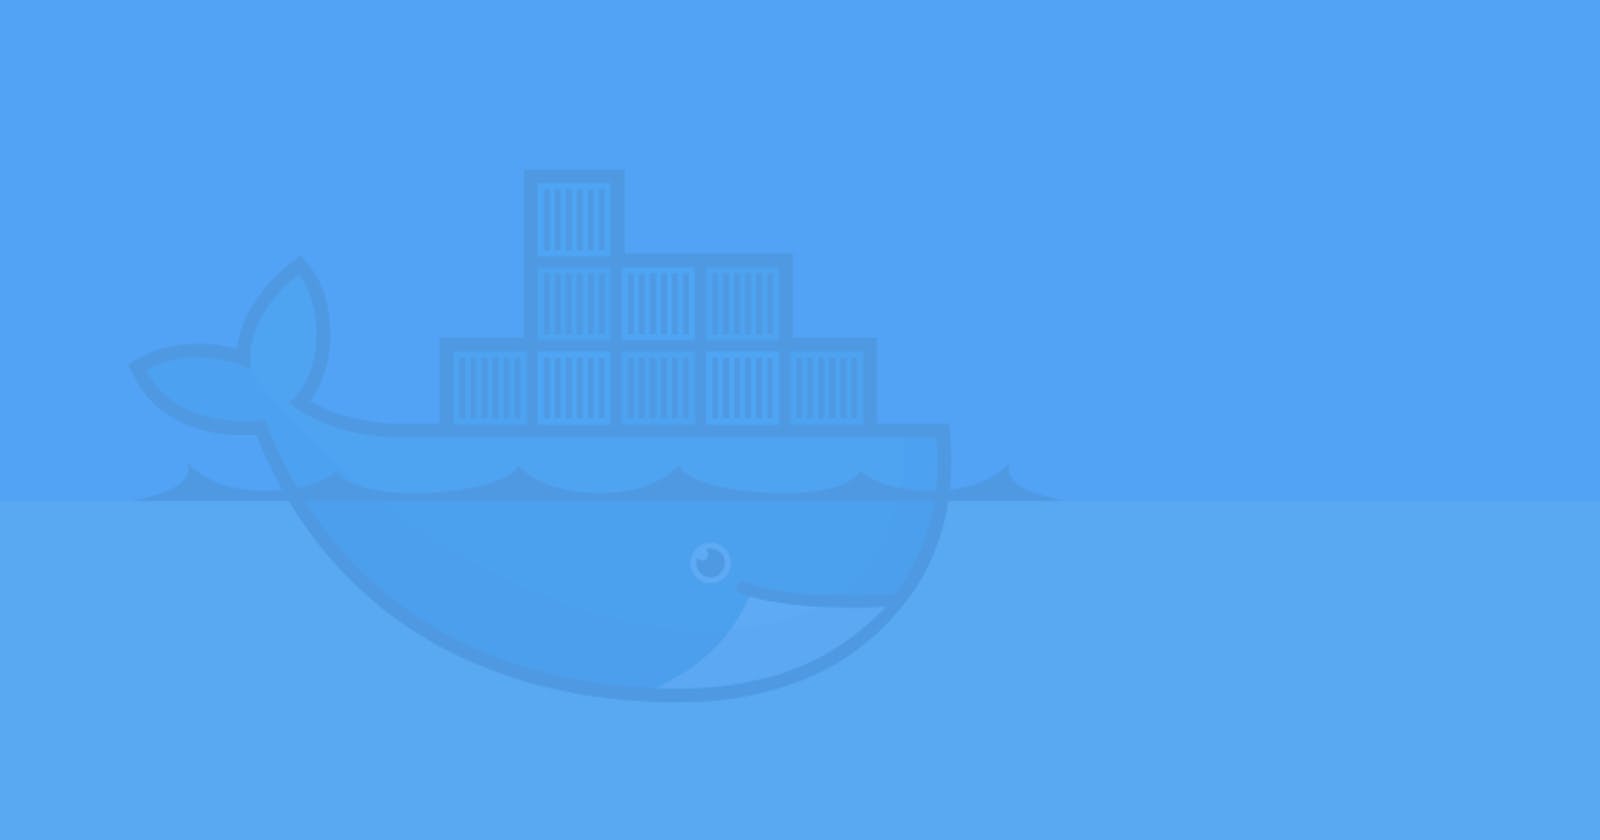 Deploying Docker Image to Github Packages